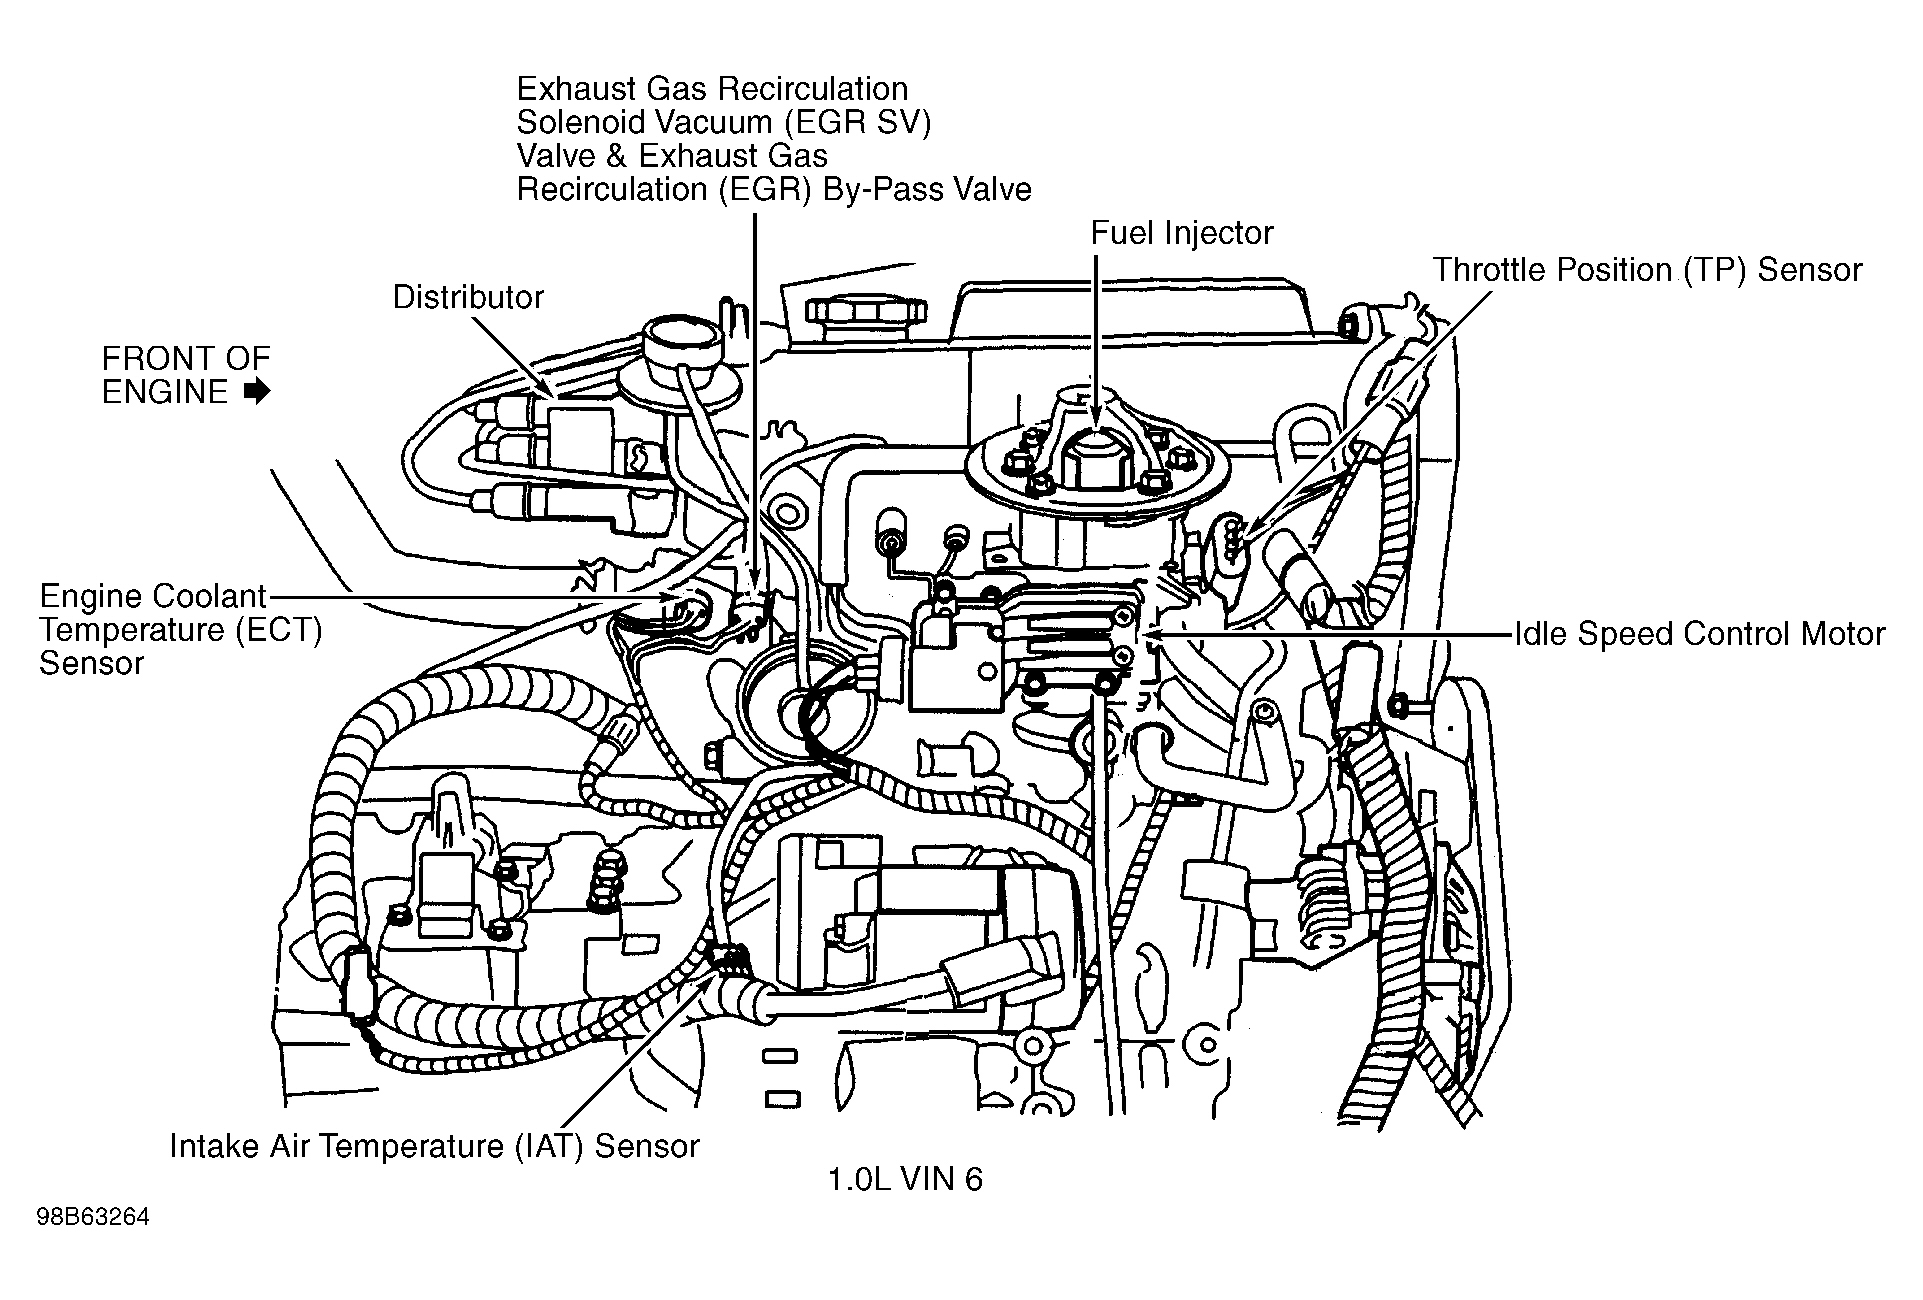 Chevrolet Metro LSi 2001 - Component Locations -  Right Side Of Engine (1.0L VIN 6)